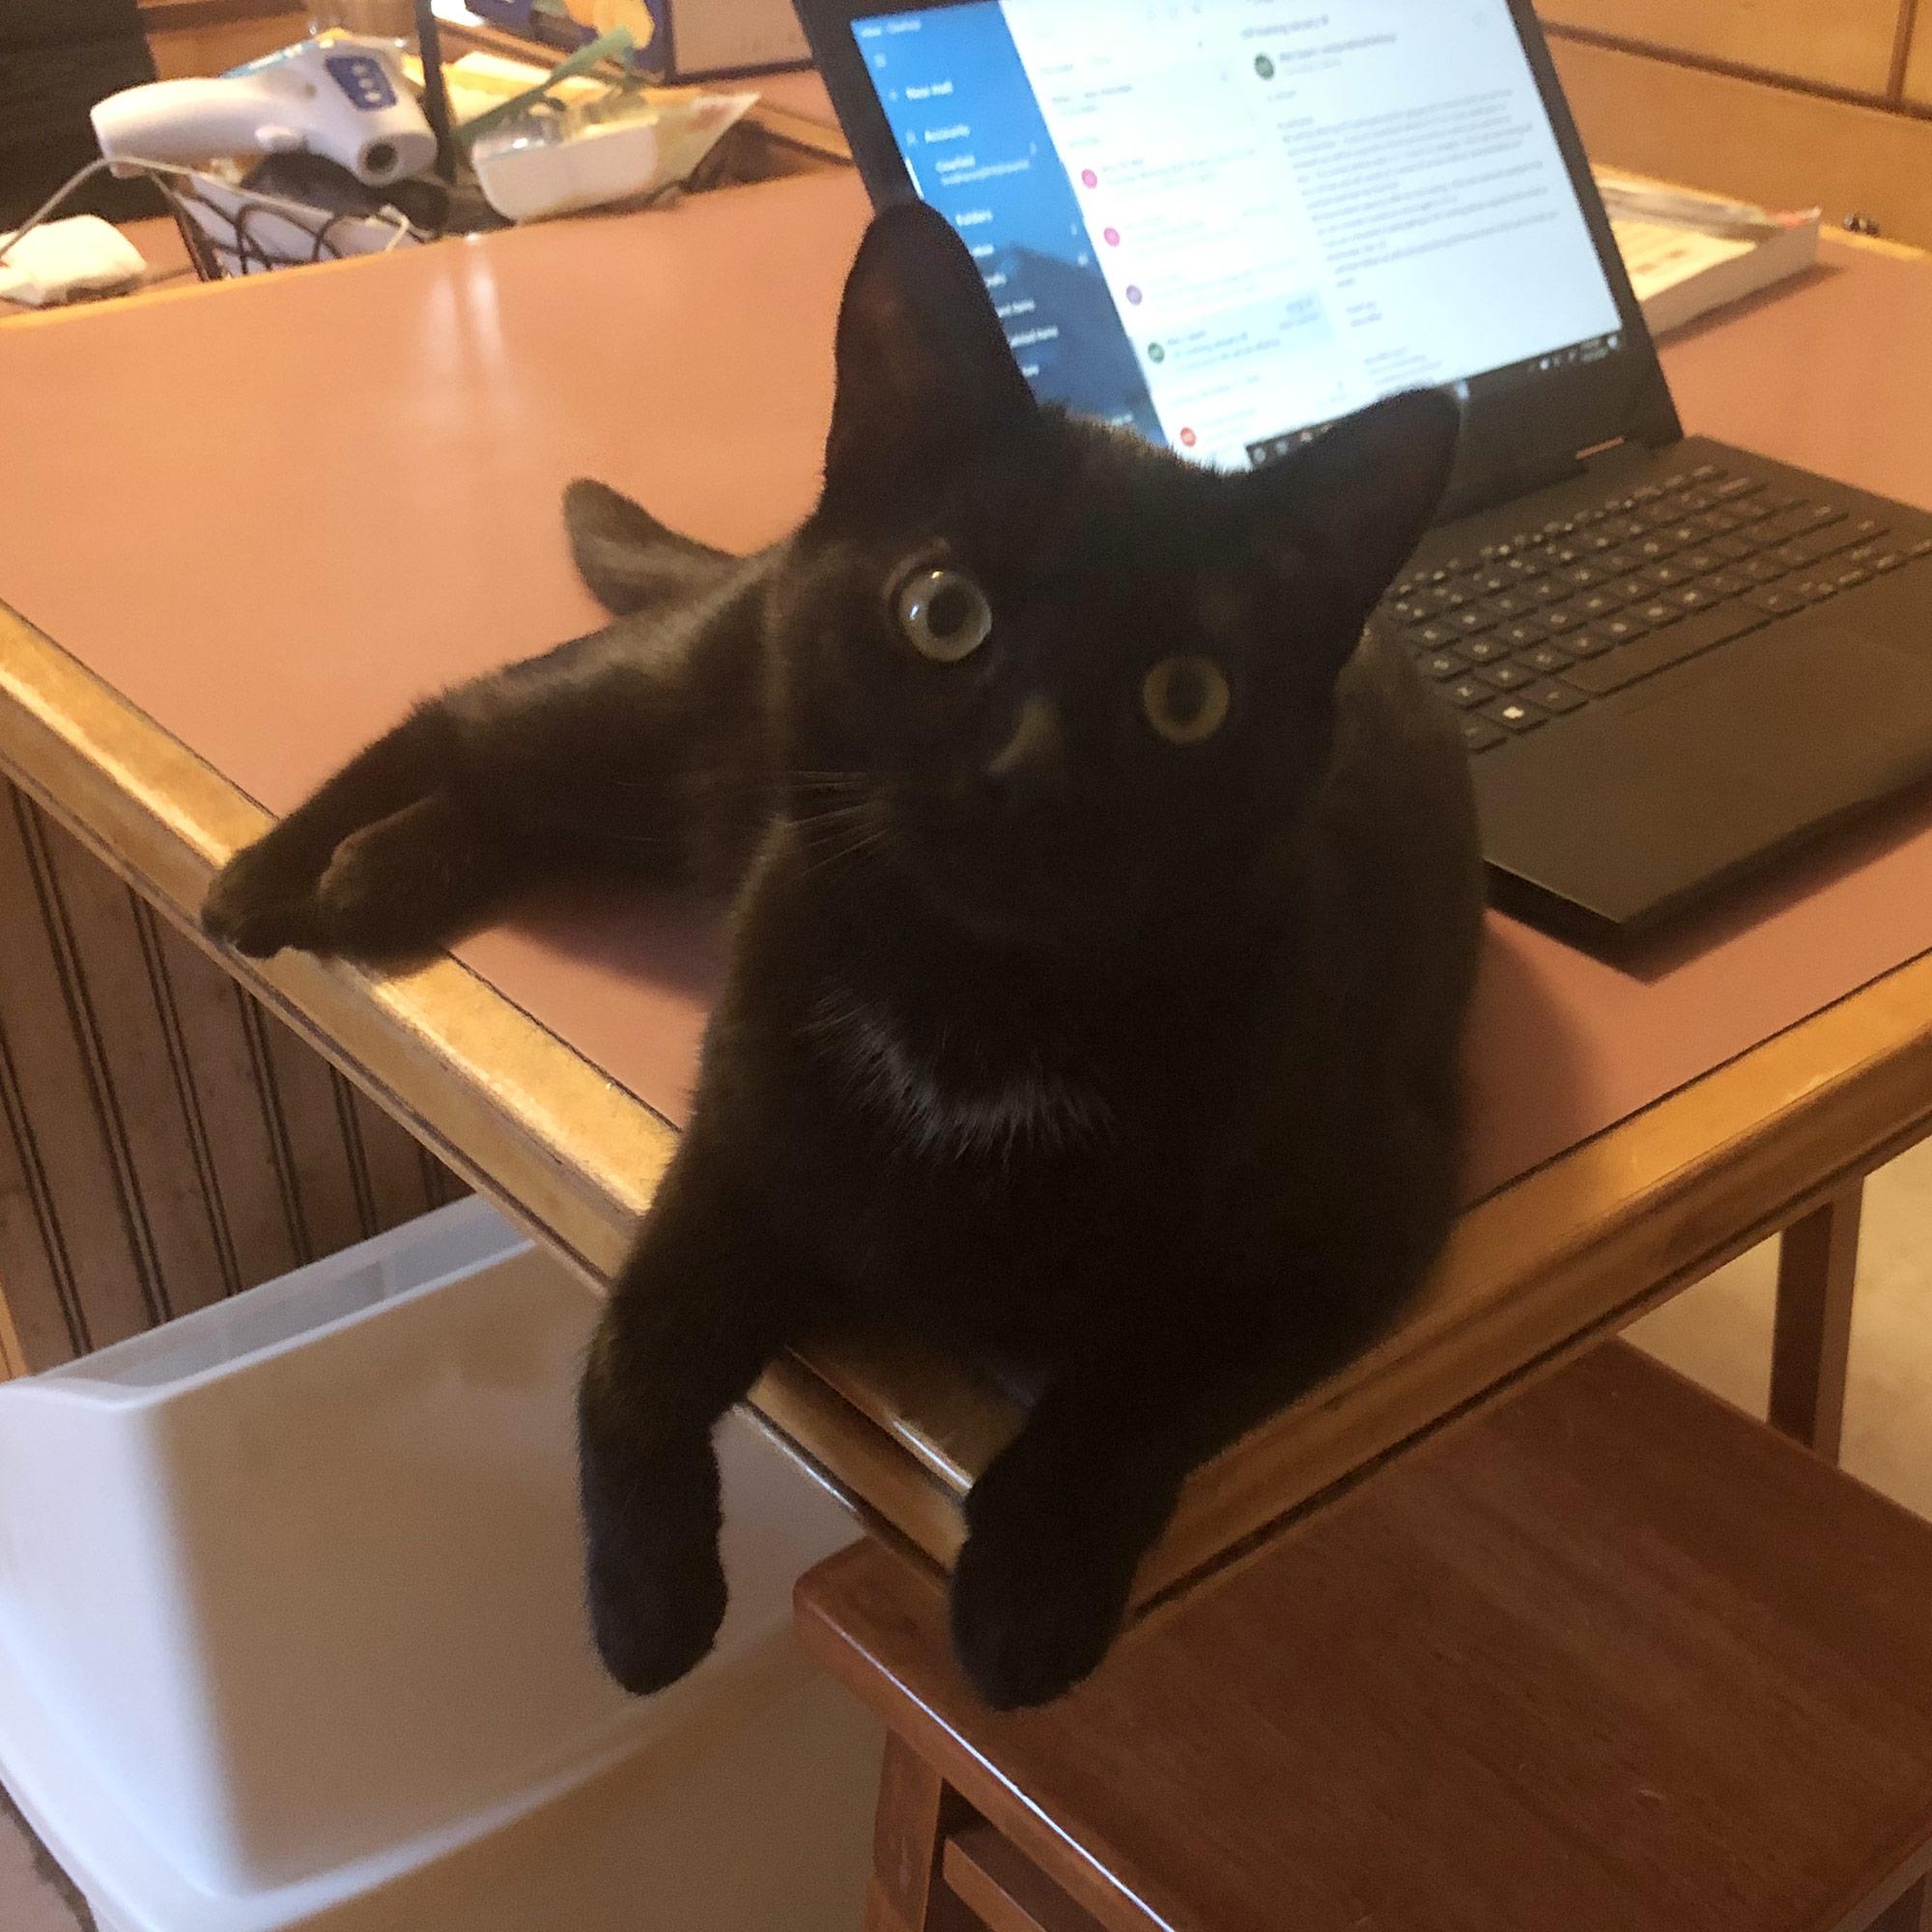 Here is a picture of my classroom assistant: Attie Cat. I am a high school math teacher and Attie Cat is helping me teach from home. – Judi Bookhamer